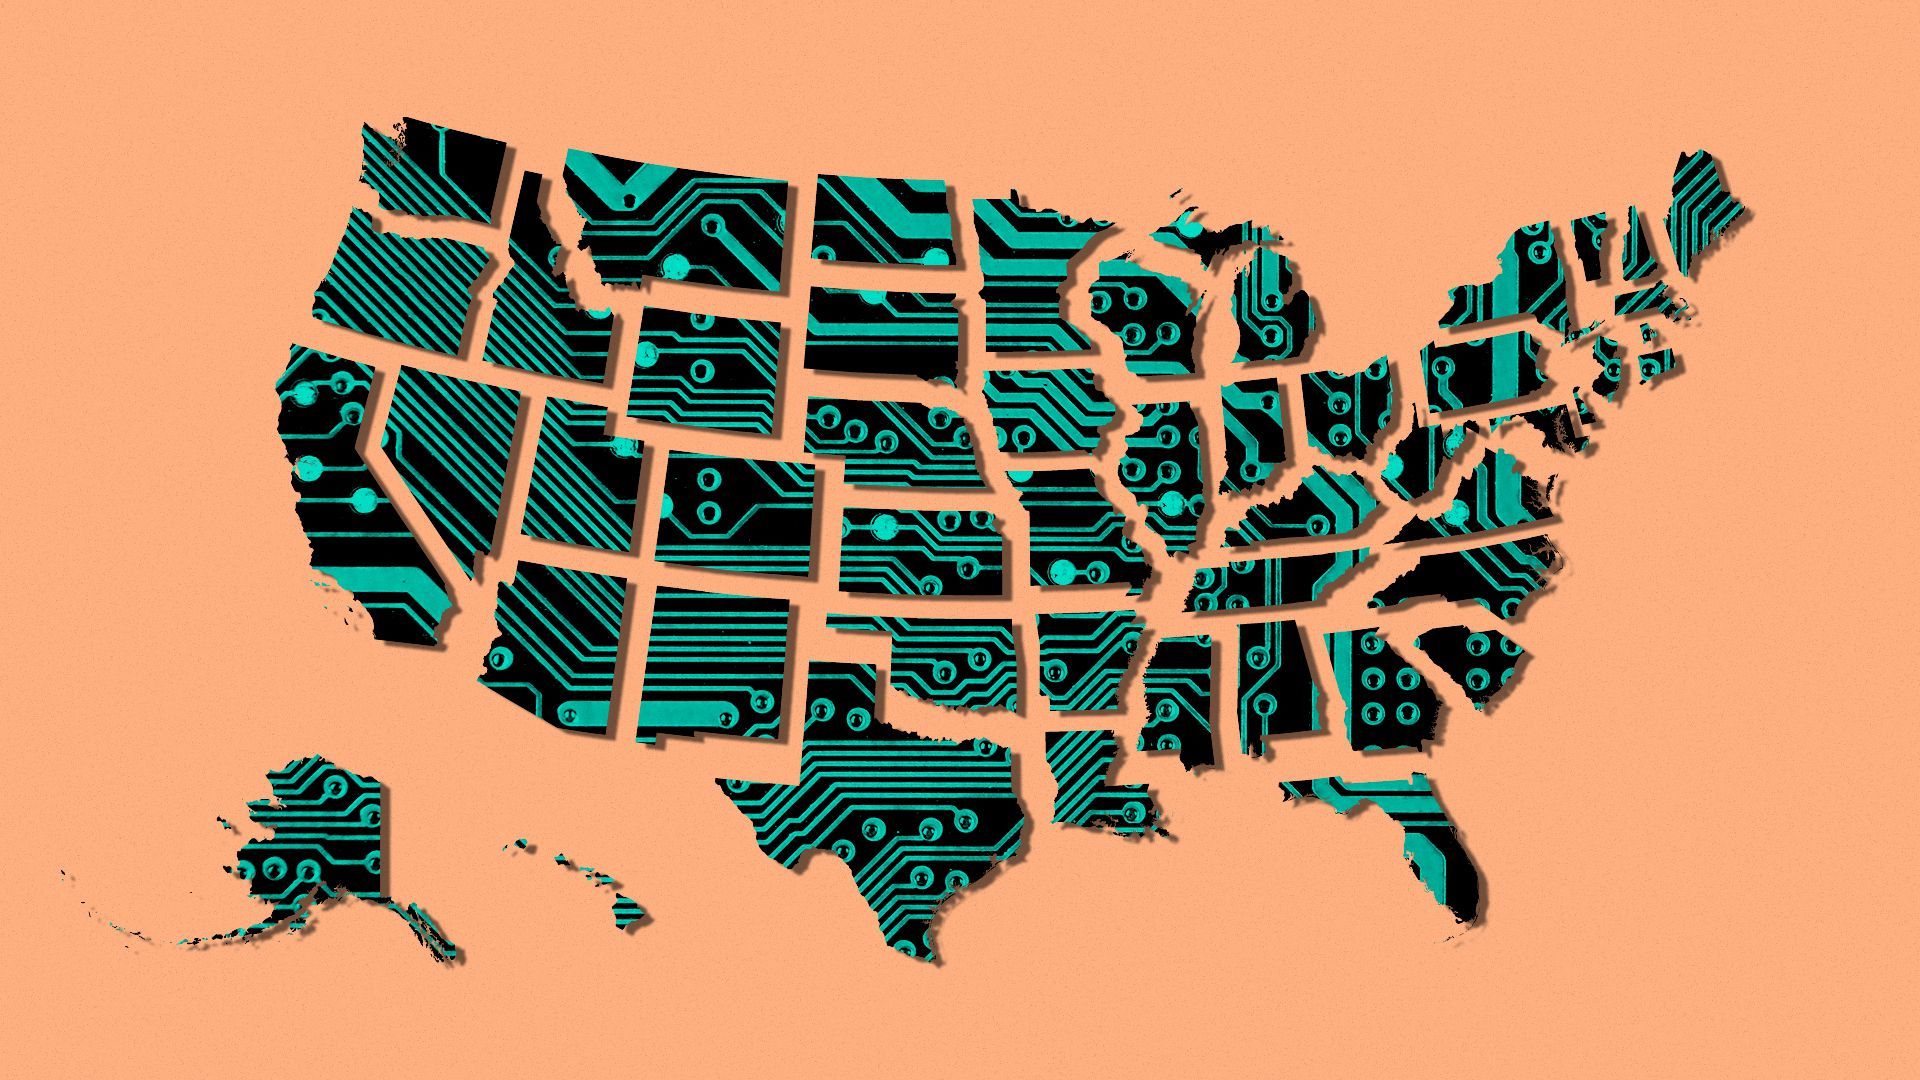 Illustration of a circuit board pattern on a map of the United States with extra space between each state's border.